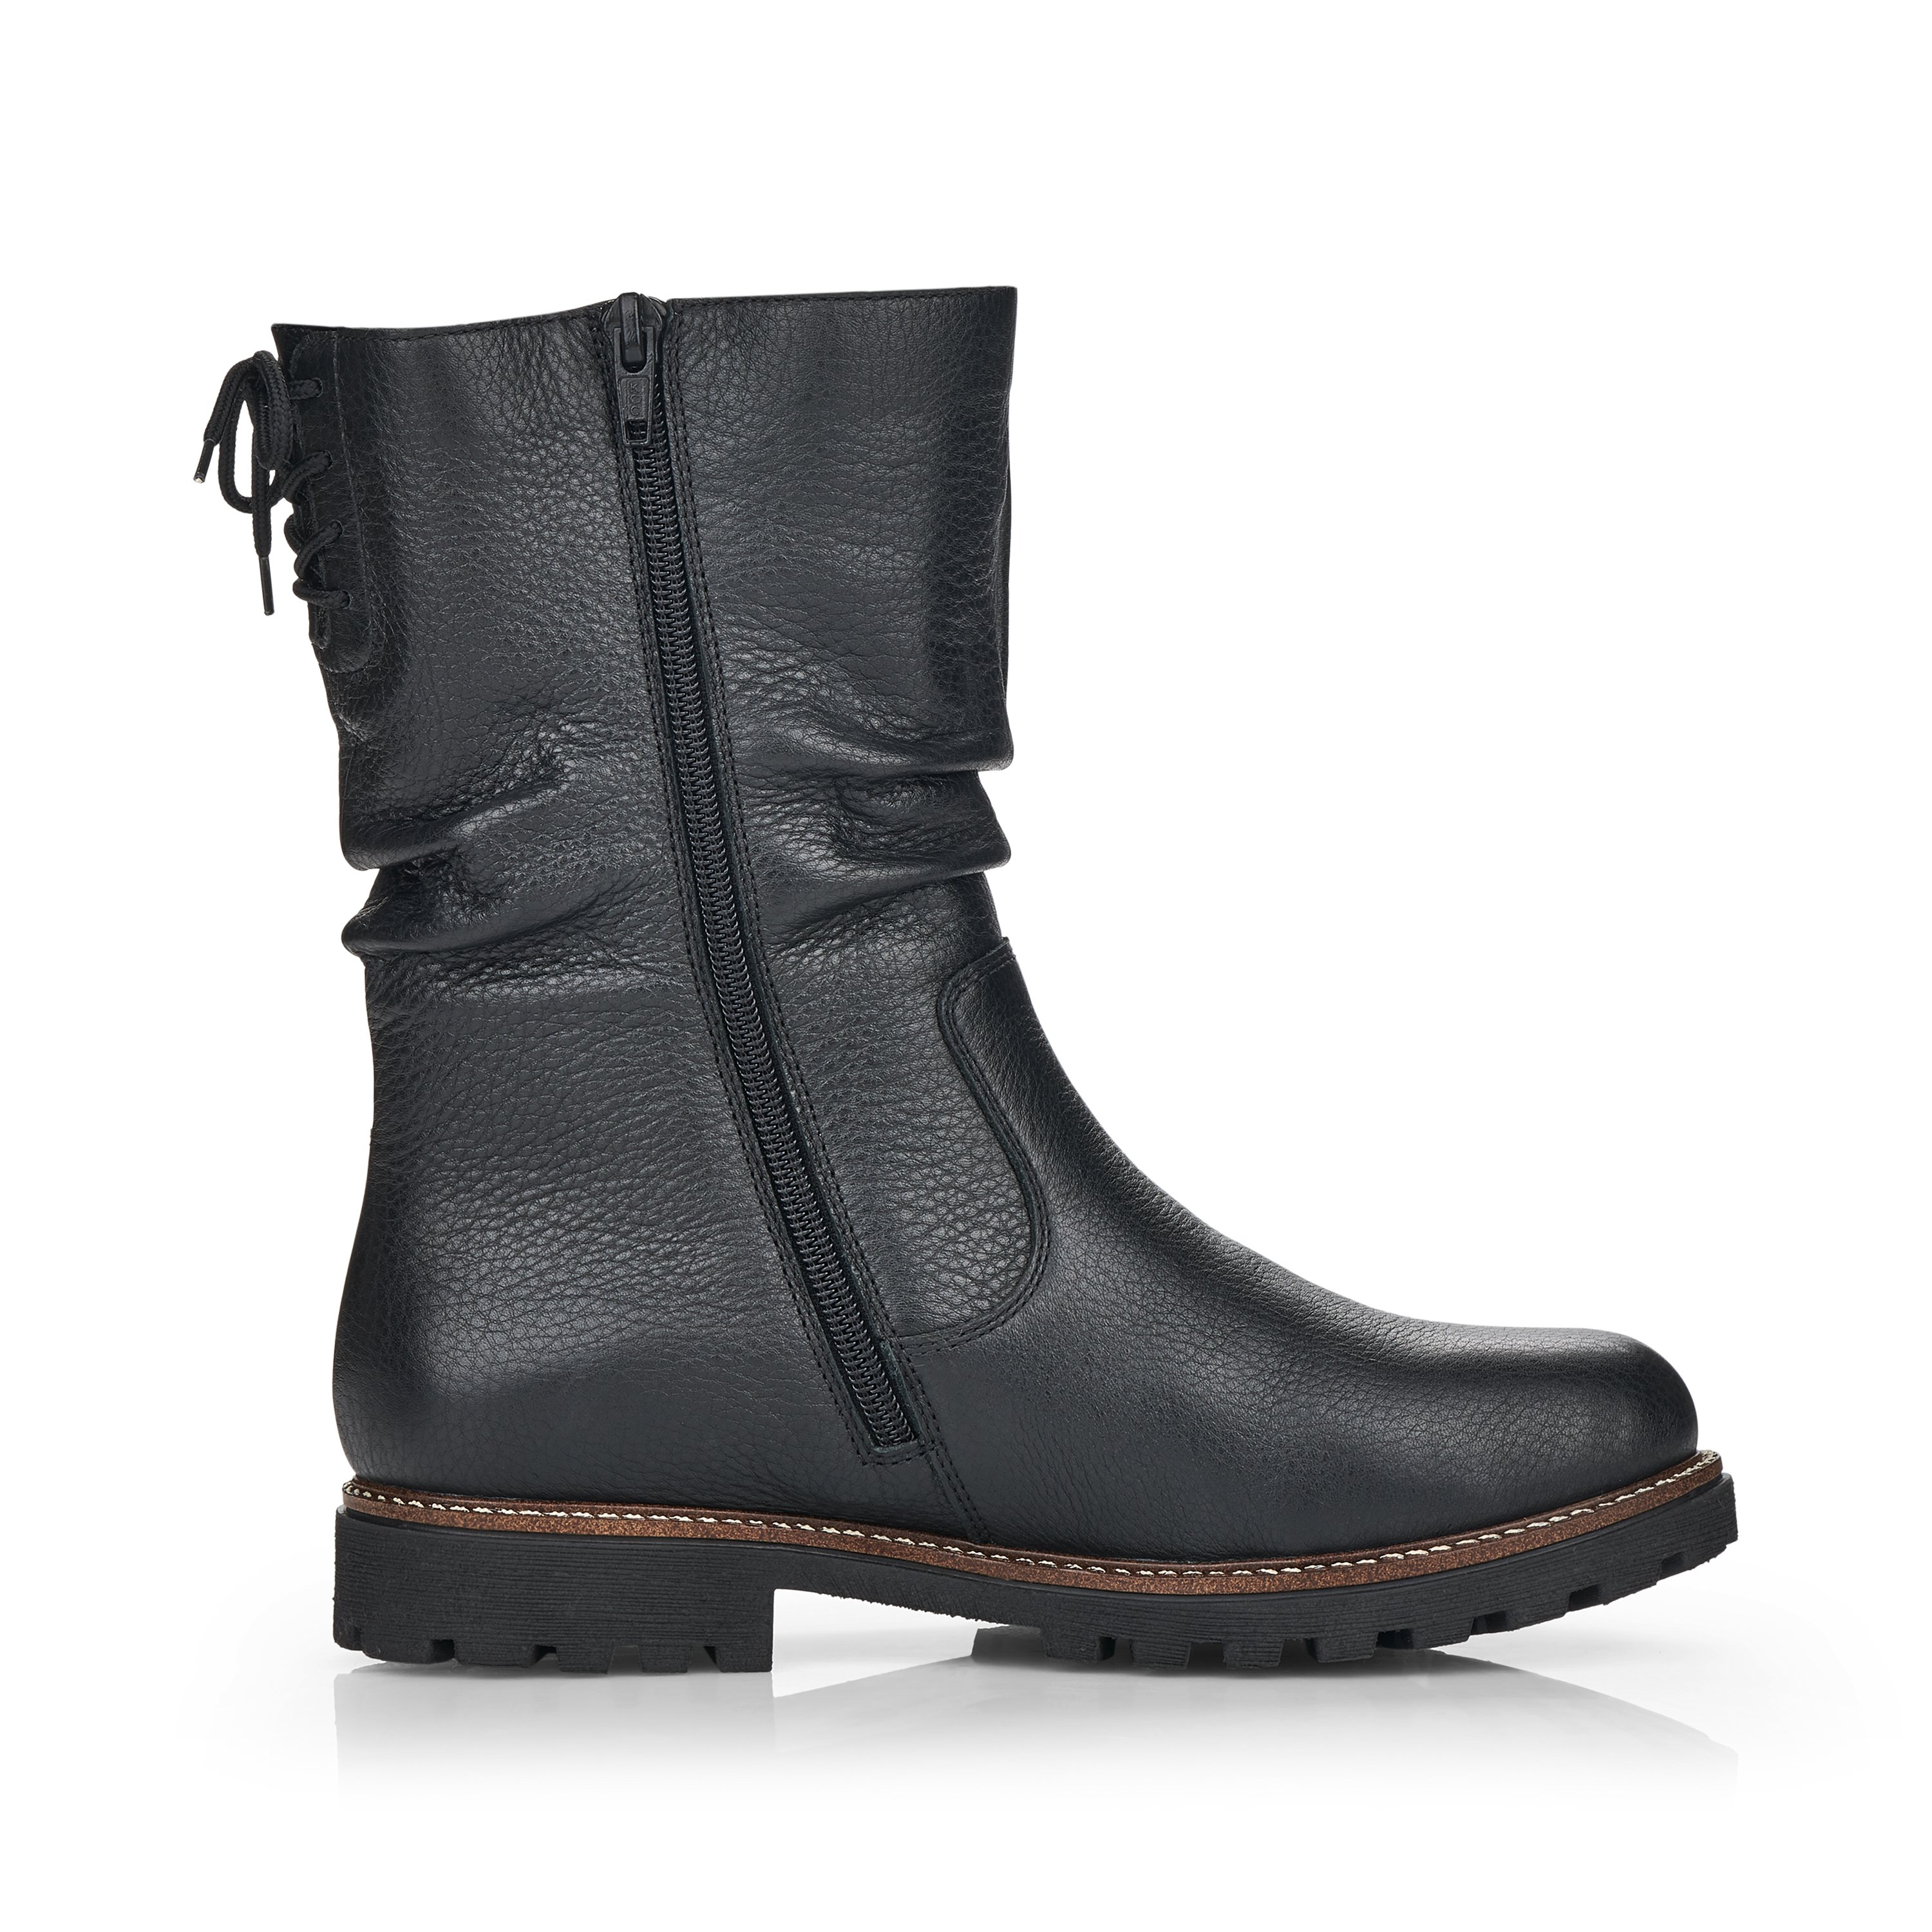 Black remonte women´s ankle boots D8477-01 with zipper as well as profile sole. Shoe inside